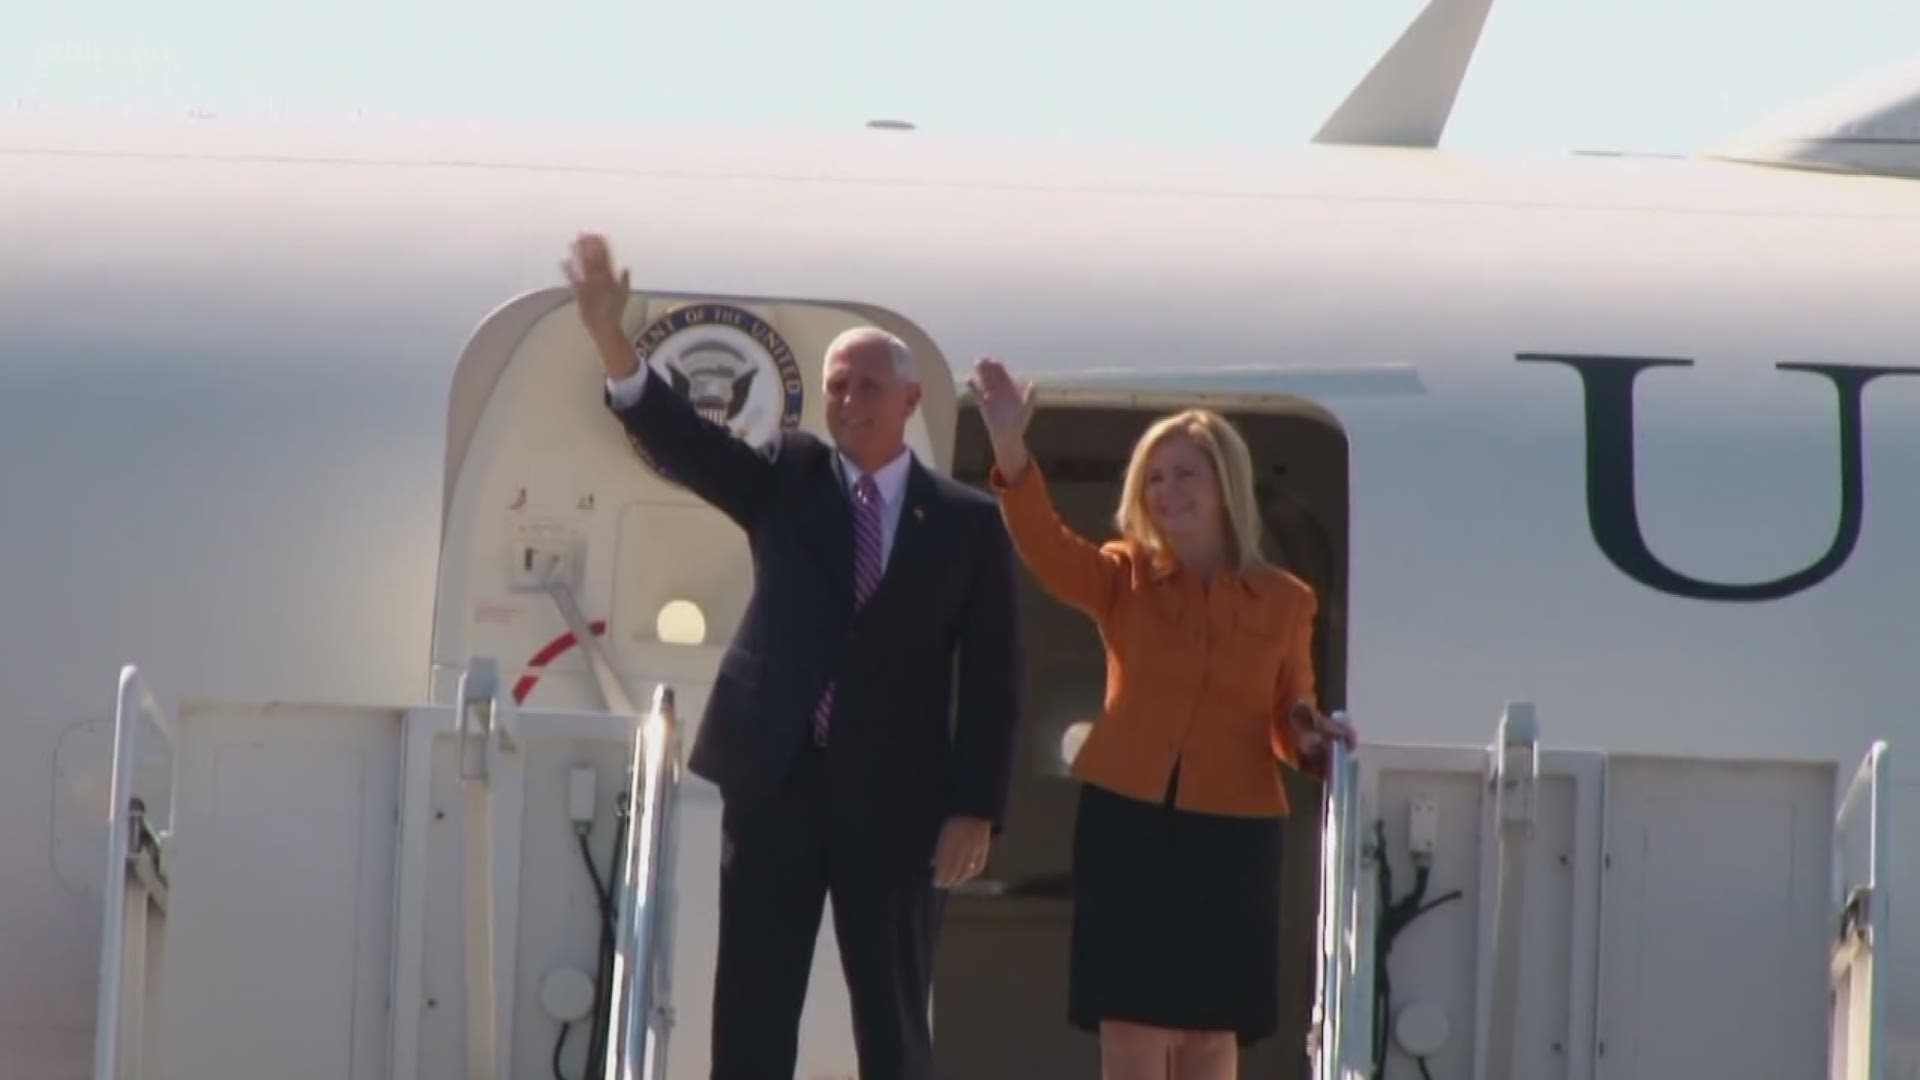 Pence arrived around 11:20 a.m. on Friday. Republican Senate candidate Marsha Blackburn departed the plane with him after a meeting on board. A crowd was there to greet him. Pence is scheduled to appear at 2 events today - a fundraiser for Blackburn and a